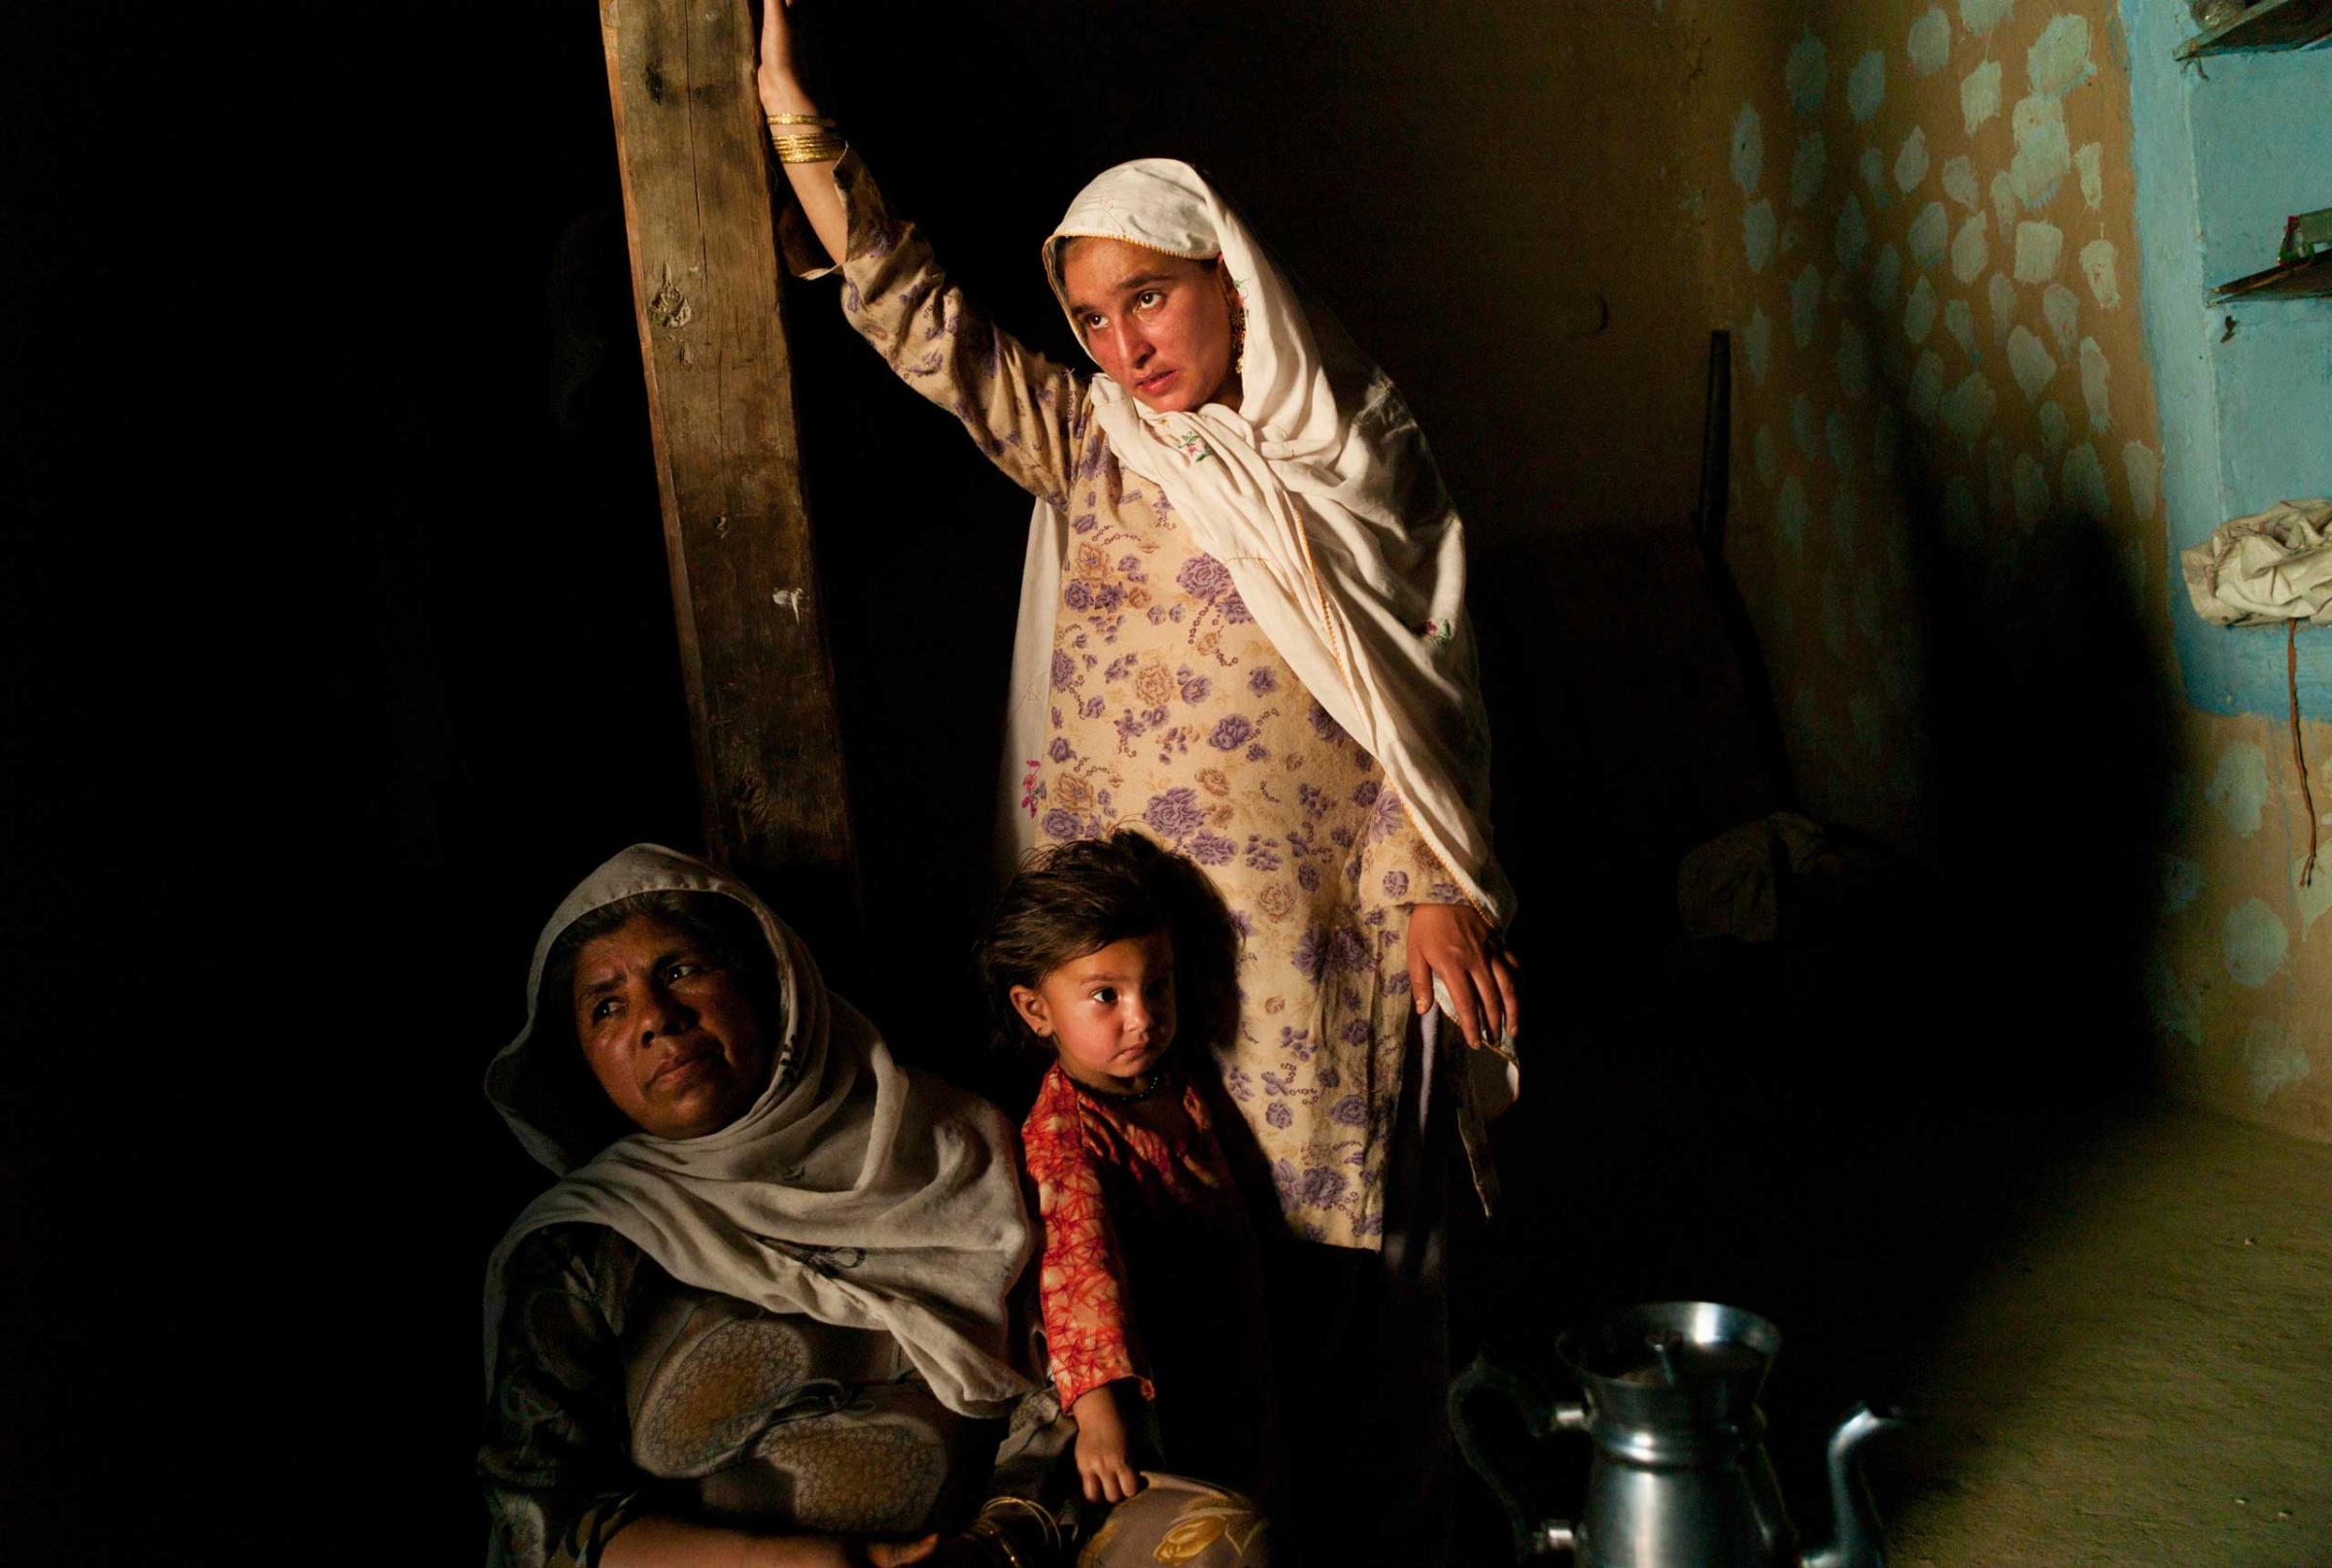 KUZA BANDAI, PAKISTAN- JUNE 2010 Sixty six year old mother of seven Gul Mina sits with her granddaughter in their small mud built home in the former Taliban stronghold of Derakai on the west bank of the Swat Valley. Along with her husband and five sons, Gul Mina, like the majority of women in her village, were ardent Taliban supporters. While the male members of her household attended the notorious madrassa at Dera Imam, she looked forward to Maulana Faizullah’s evening broadcasts on his FM radio station; especially the segment where the men were told to leave the room and he spoke softly to female listeners. “He told us to wear burqas, that men should refrain from meeting with their brother’s wives and gave us guidance. He was such a good, pious man- I followed his beliefs along with my husband”. While her boys were ready to join the insurgents, Gul Mina became doubtful when the assassinations and beheadings began but it was hard to change sides within such a hardcore, close-knit community. As army operations commenced in the spring of 2009, she persuaded her family to flee the valley in search of refuge.These days Gul Mina is stressed and fearful and spends her time worrying about her extended family’s future. The military have arrested thousands in Swat that were linked to Faizullah’s Taliban, destroying their homes and forcing others out of the valley. “We loved the Taliban but nobody in this house committed any crime. Now when I think of these times, I feel so stupid”.